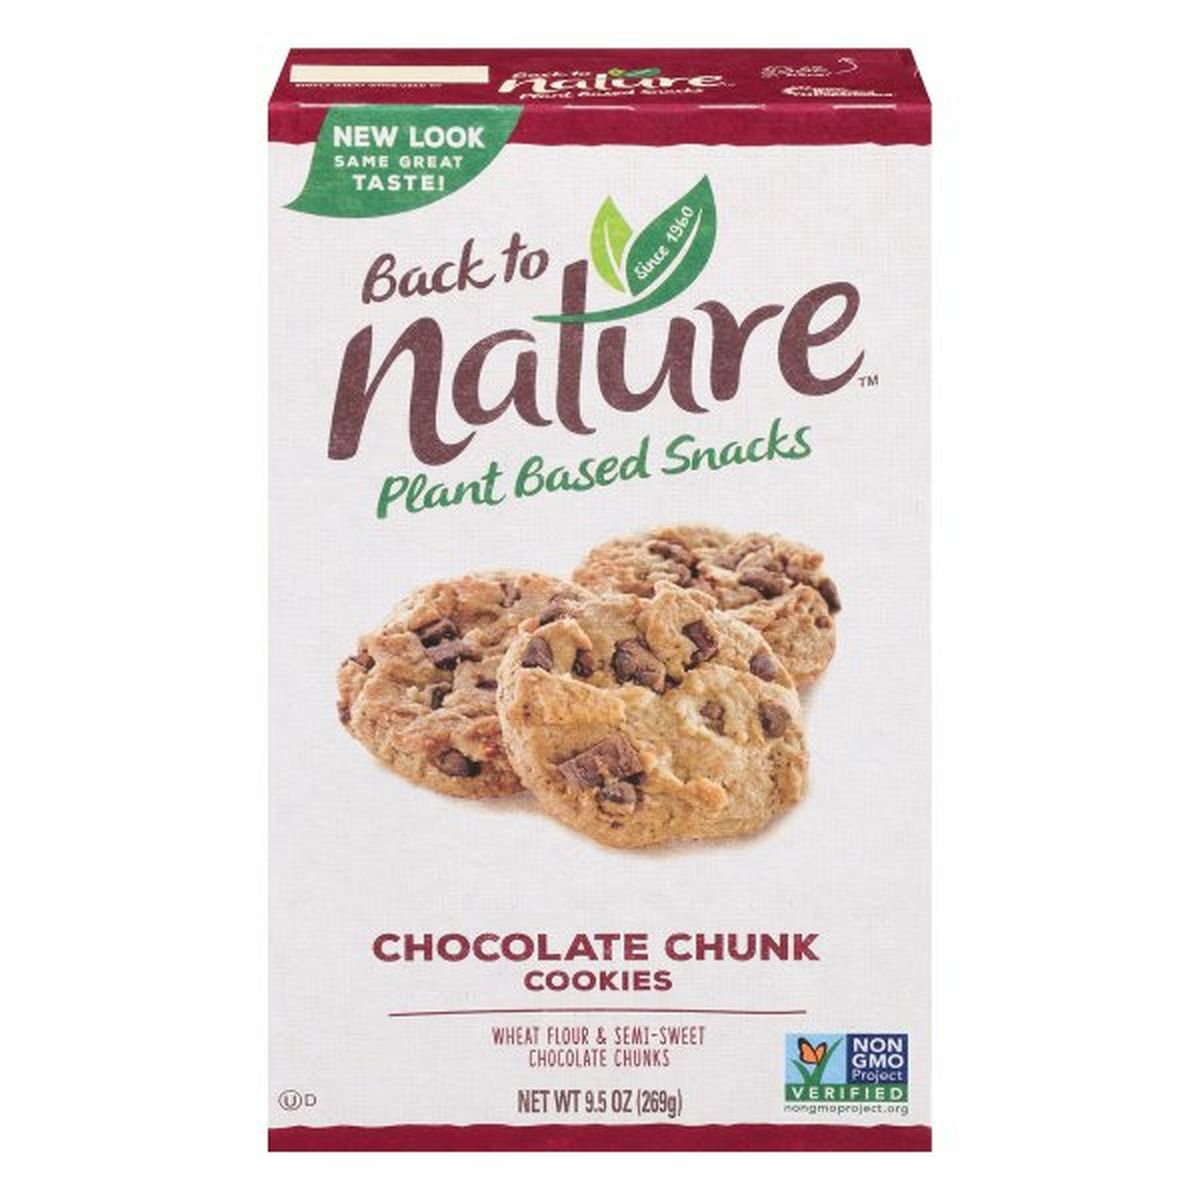 Calories in Back to Nature Cookies, Chocolate Chunk